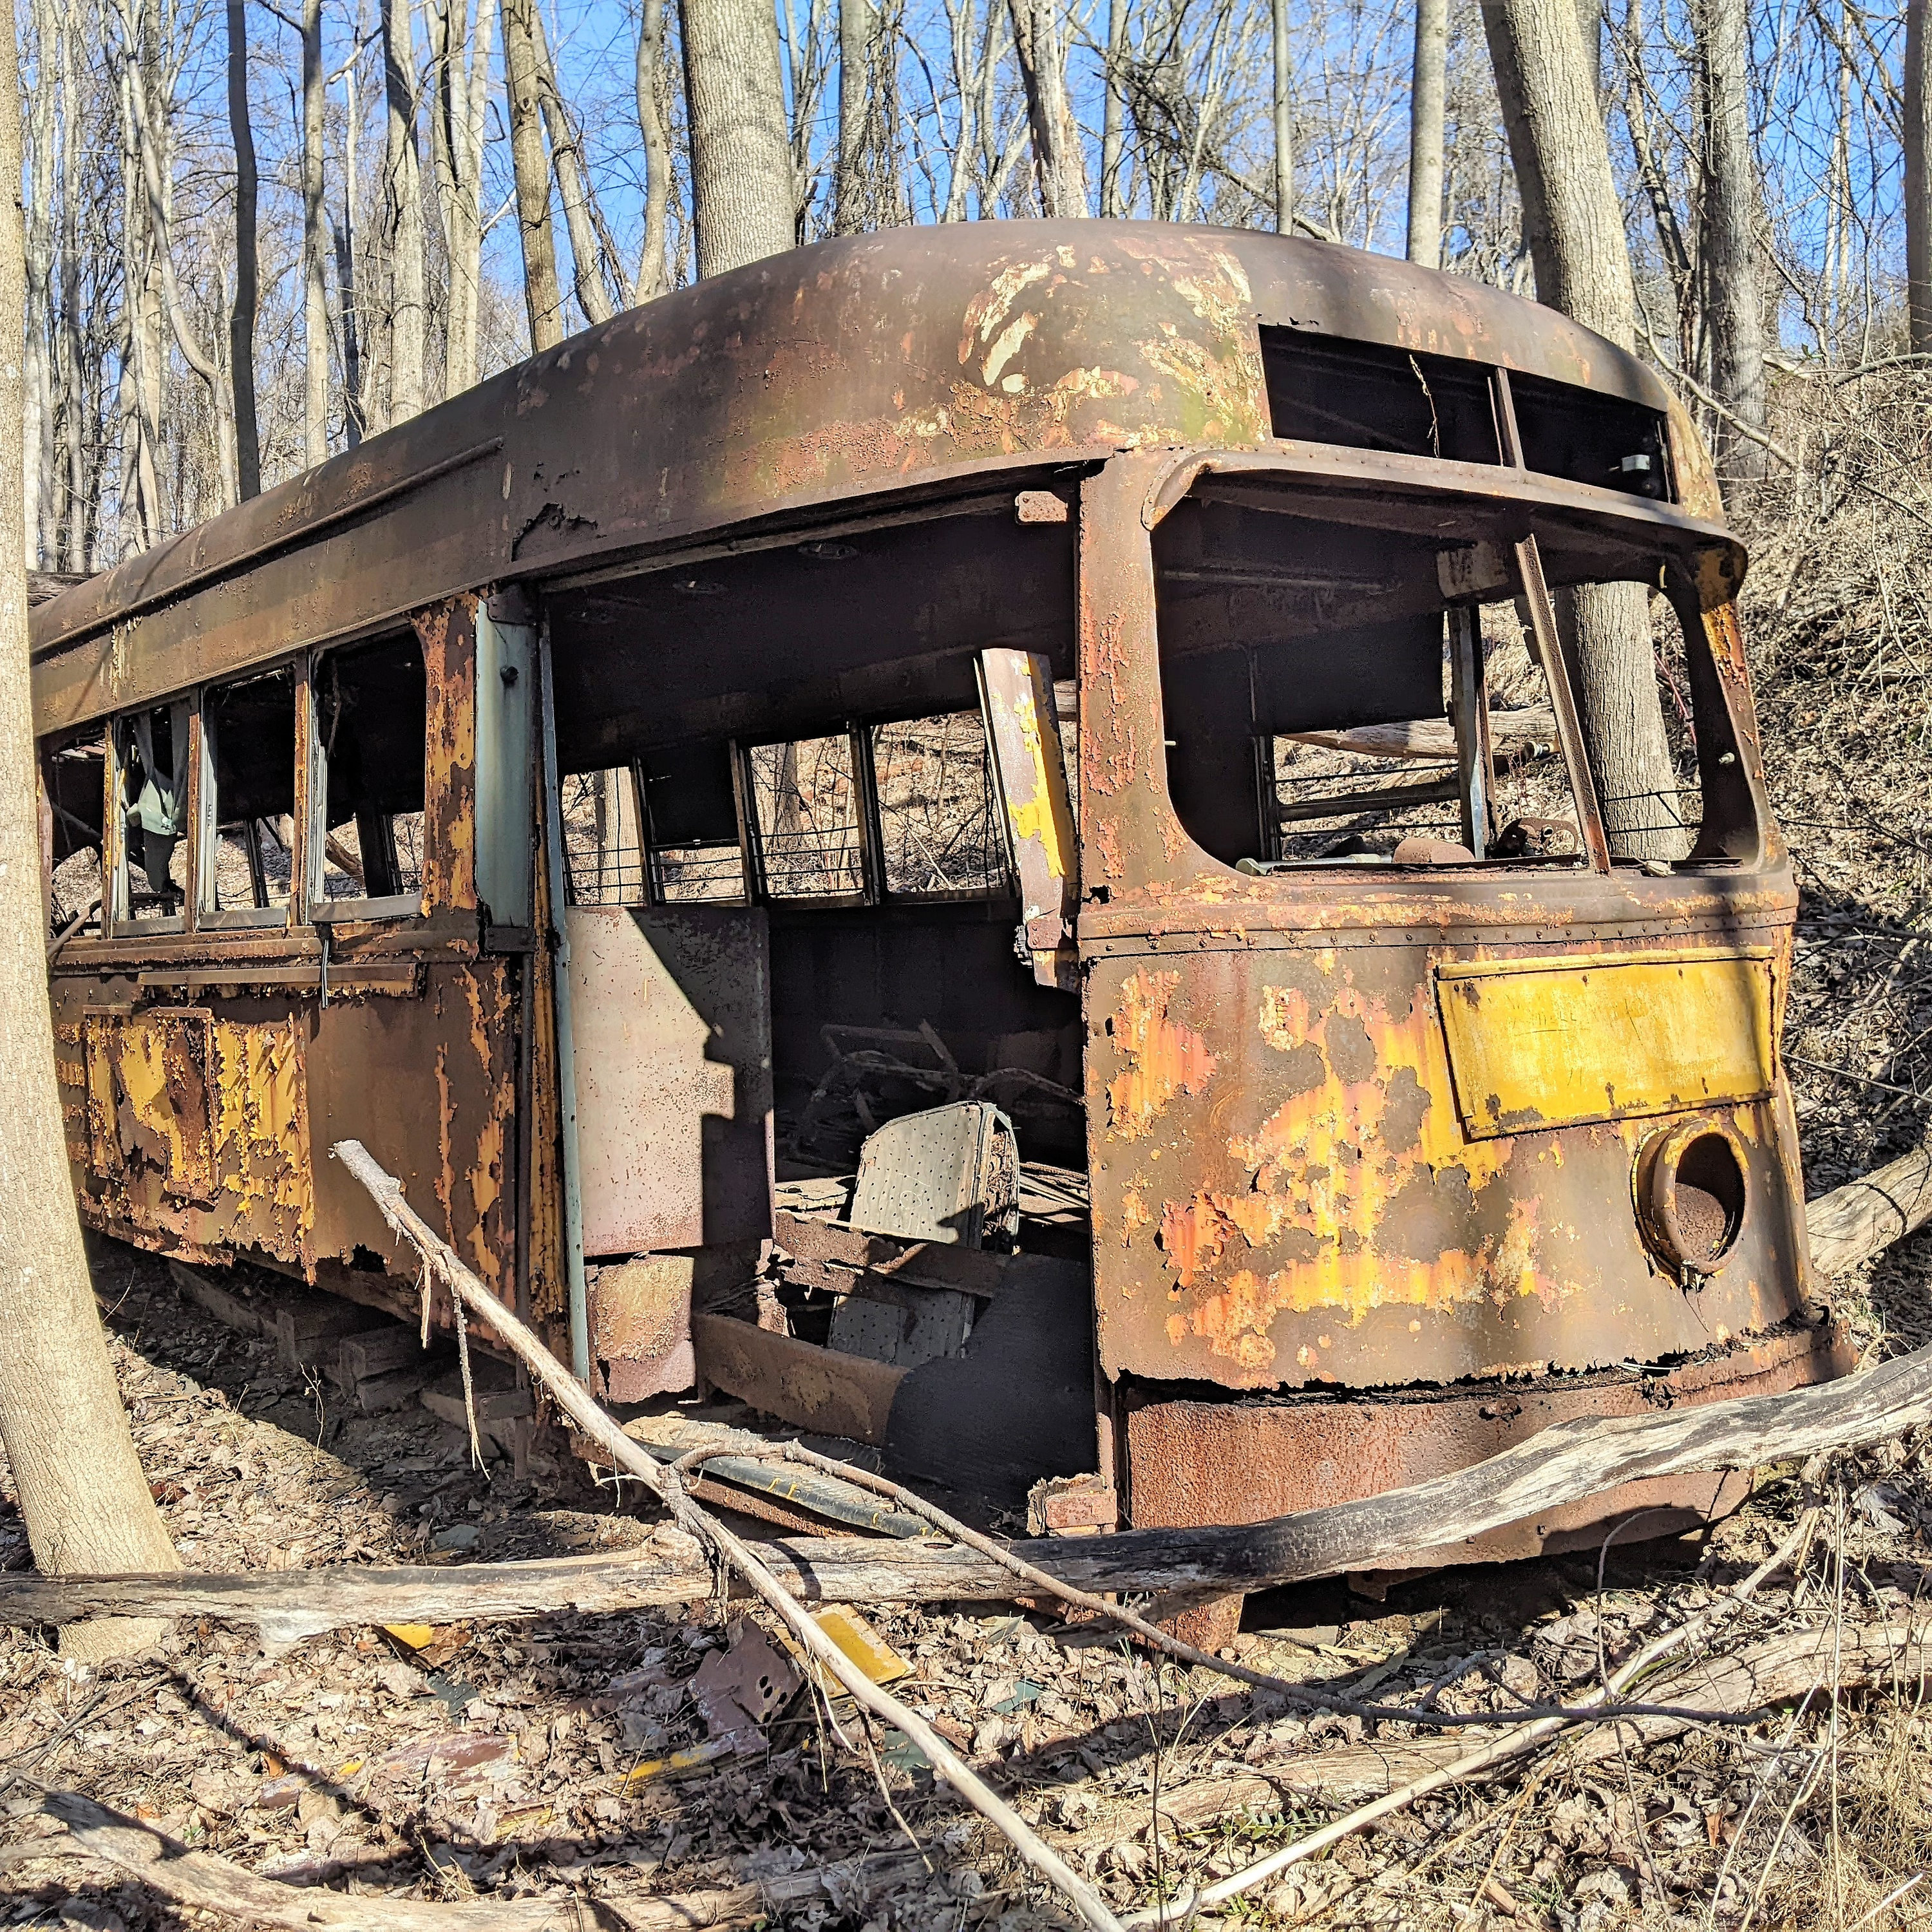 Why Is There An Abandoned Streetcar In The Woods?